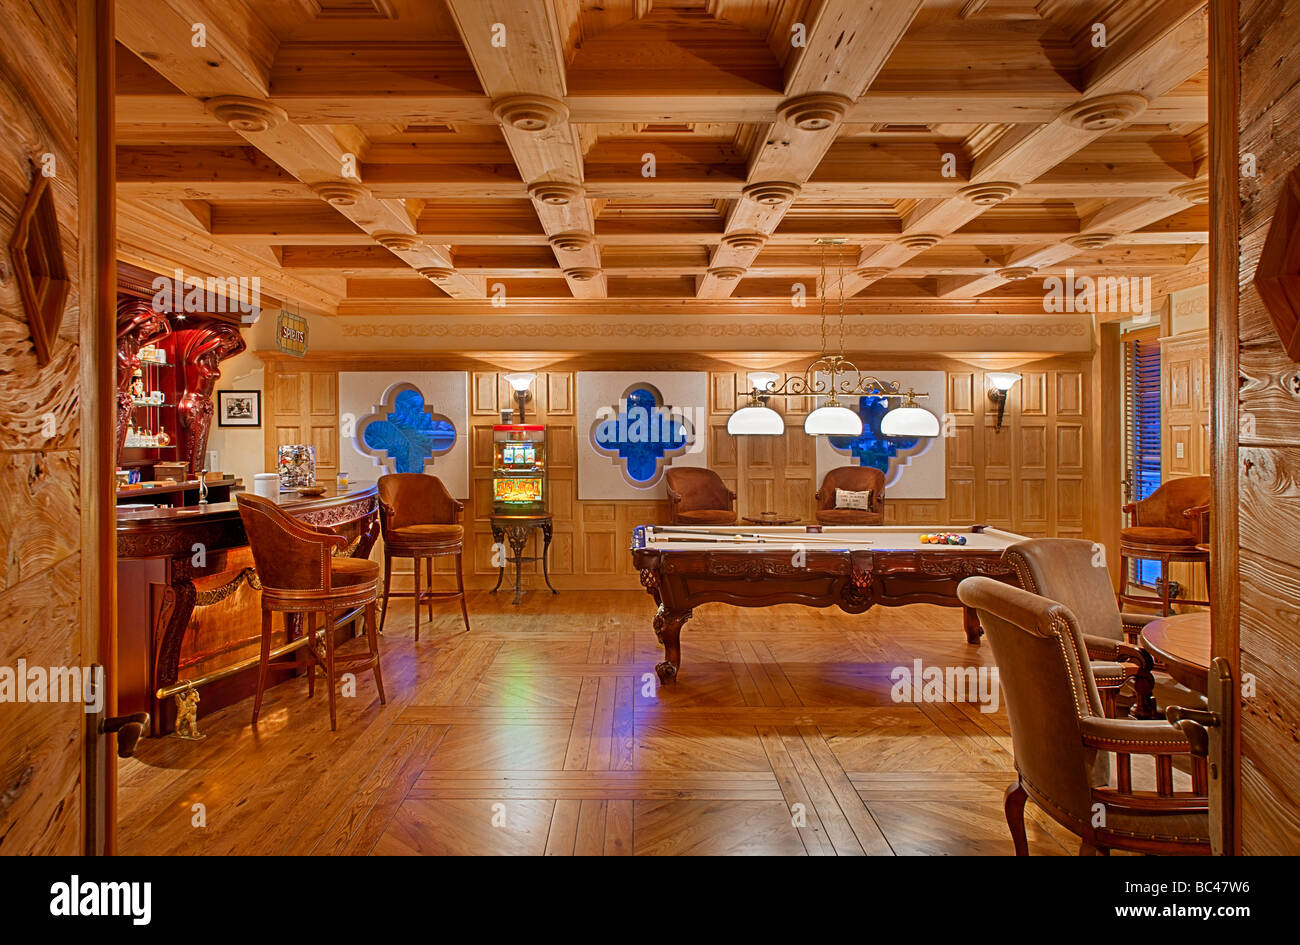 A game room at a luxury residence in Boca Raton, Florida, USA Stock Photo